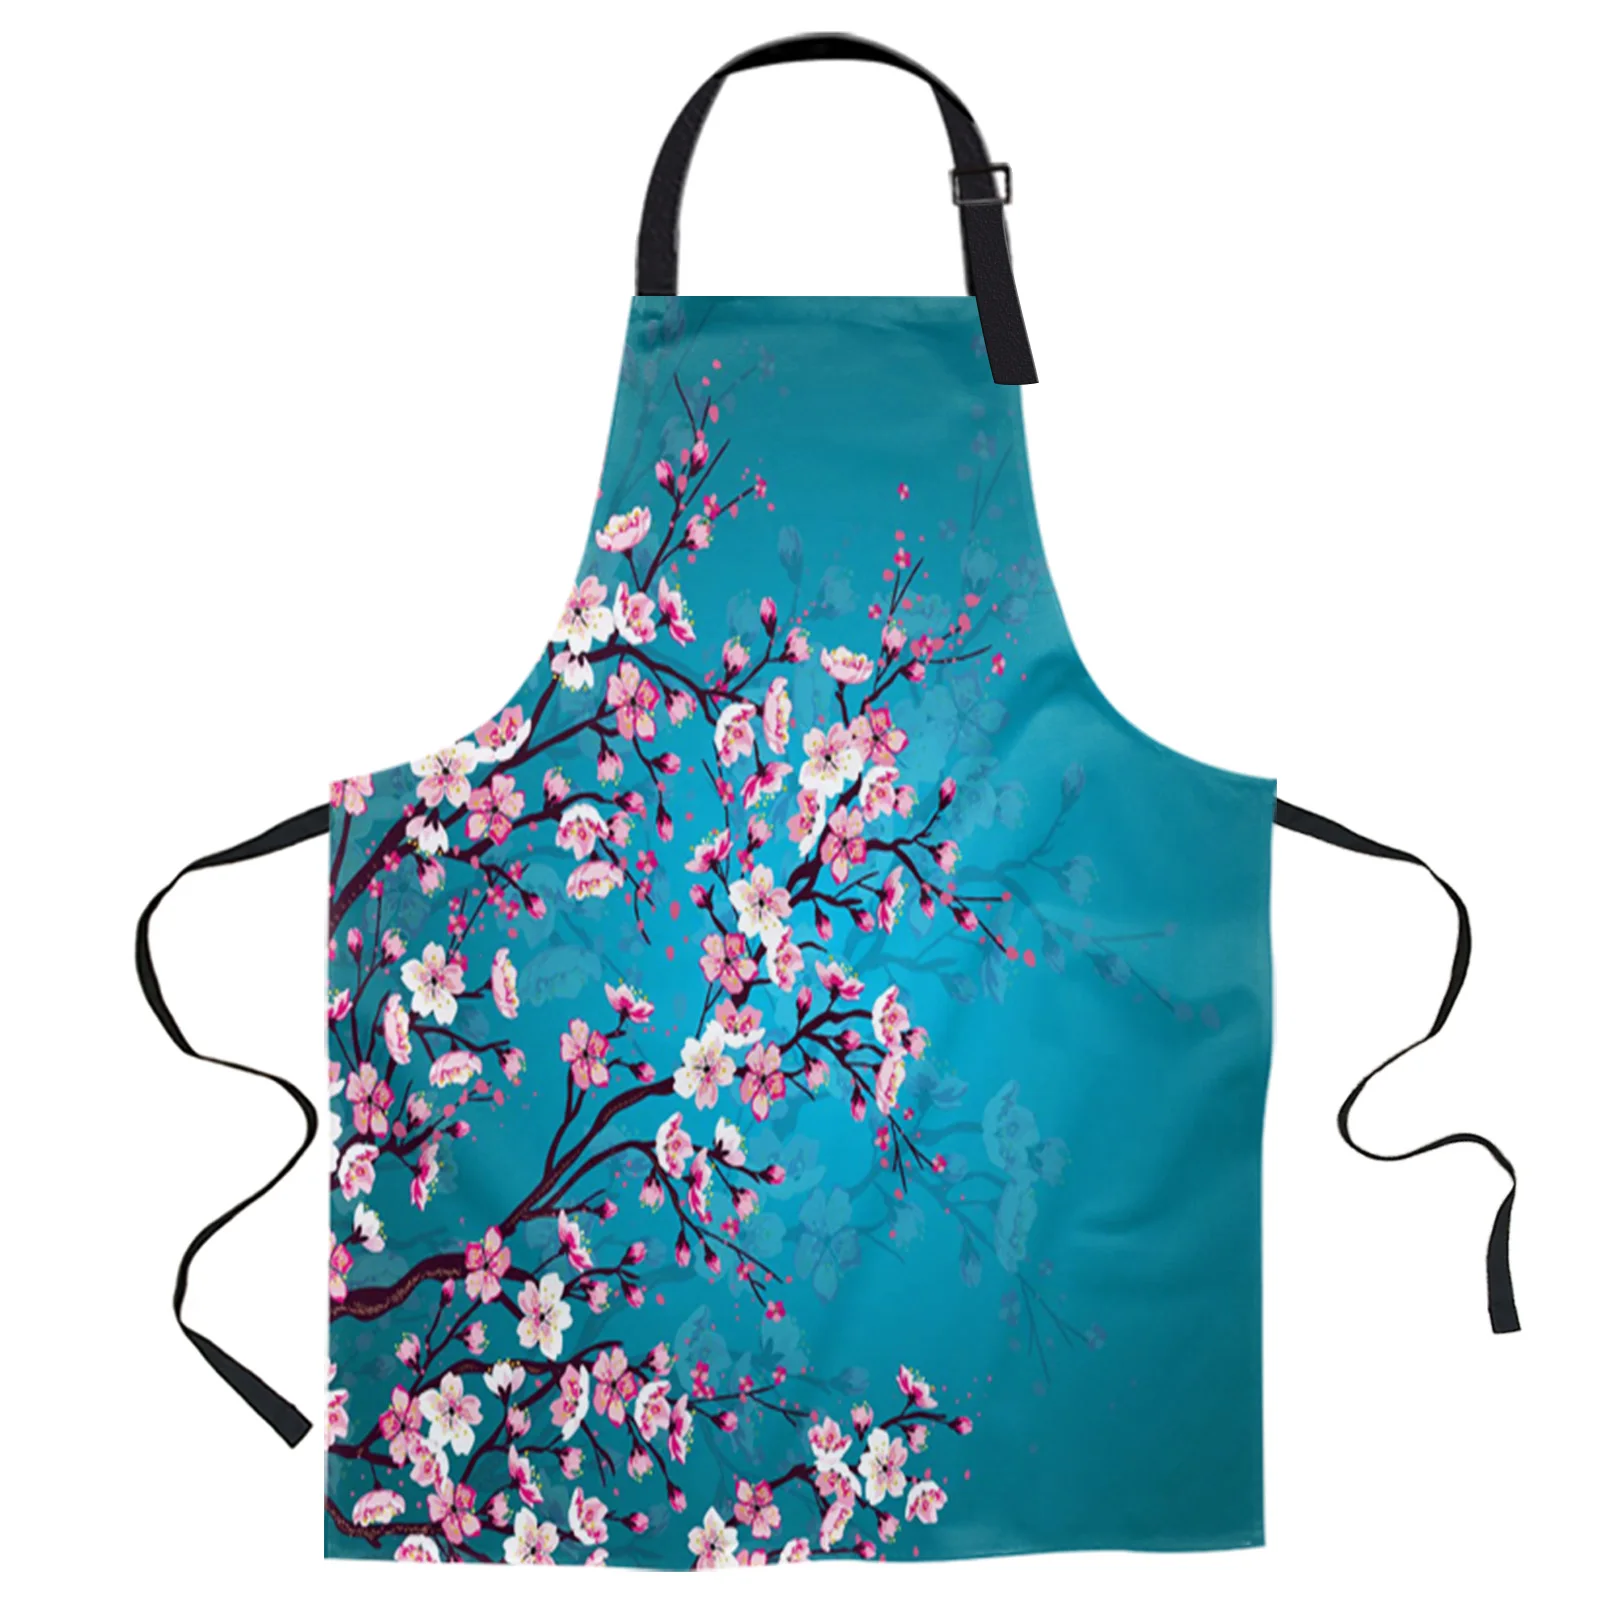 

Cherry Blossom Plum Branch Pink Flower Kitchen Nail Shop Apron for Women Men Kids Aprons Dinner Party Cooking Baking Accessories